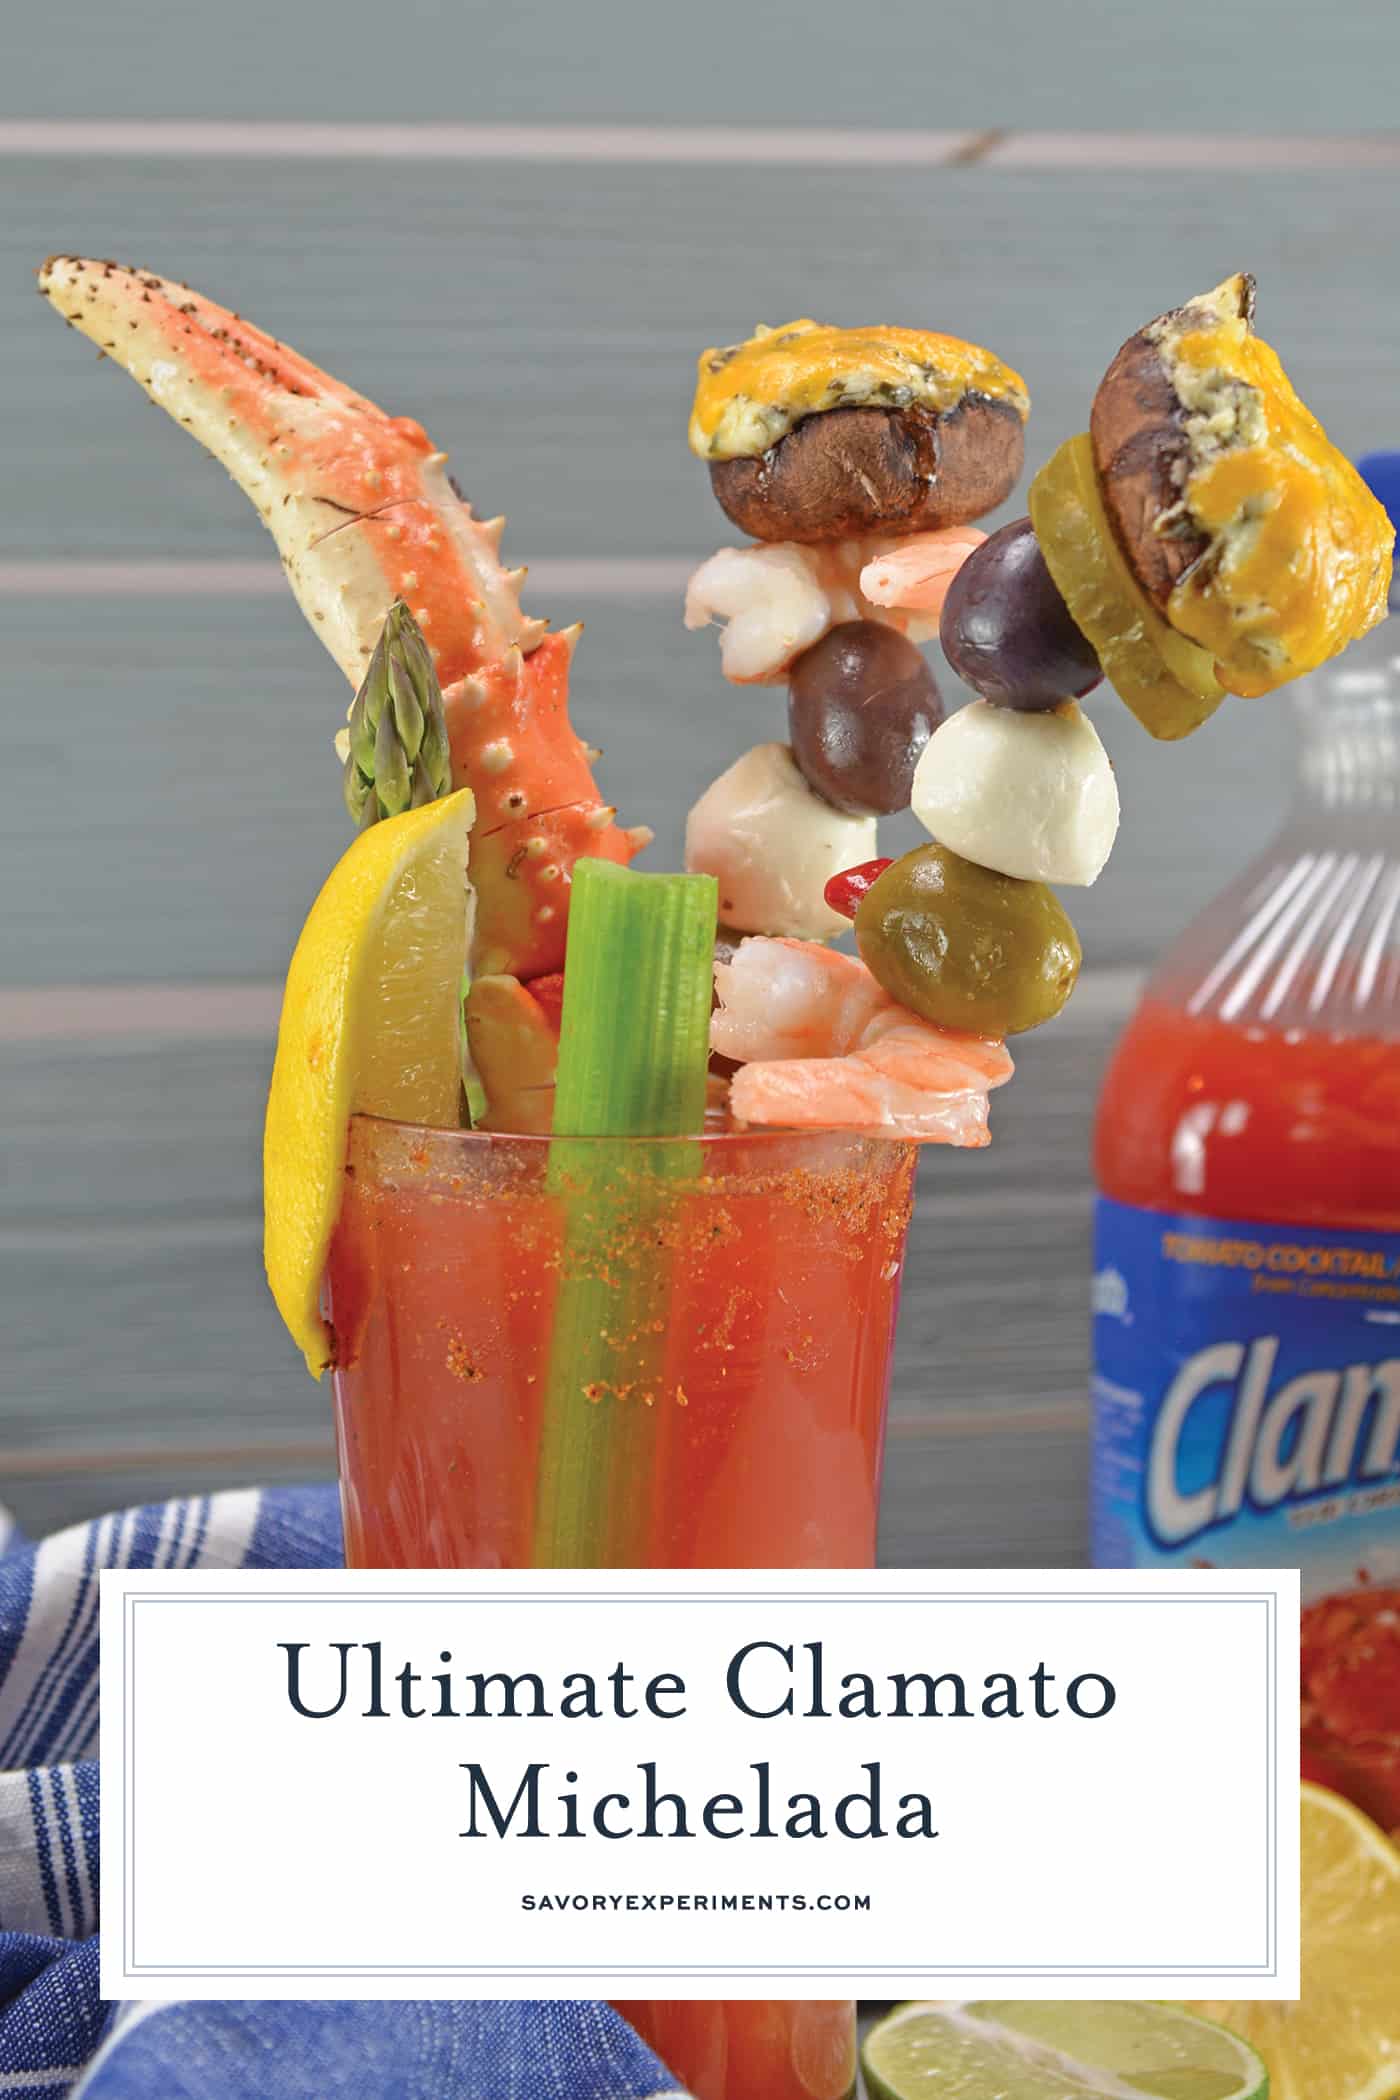 A Clamato Michelada is the perfect brunch cocktail using Clamato juice, beer, hot sauce + spices for a refreshing drink! #clamatomichelada #brunchcocktail www.savoryexeriments.com